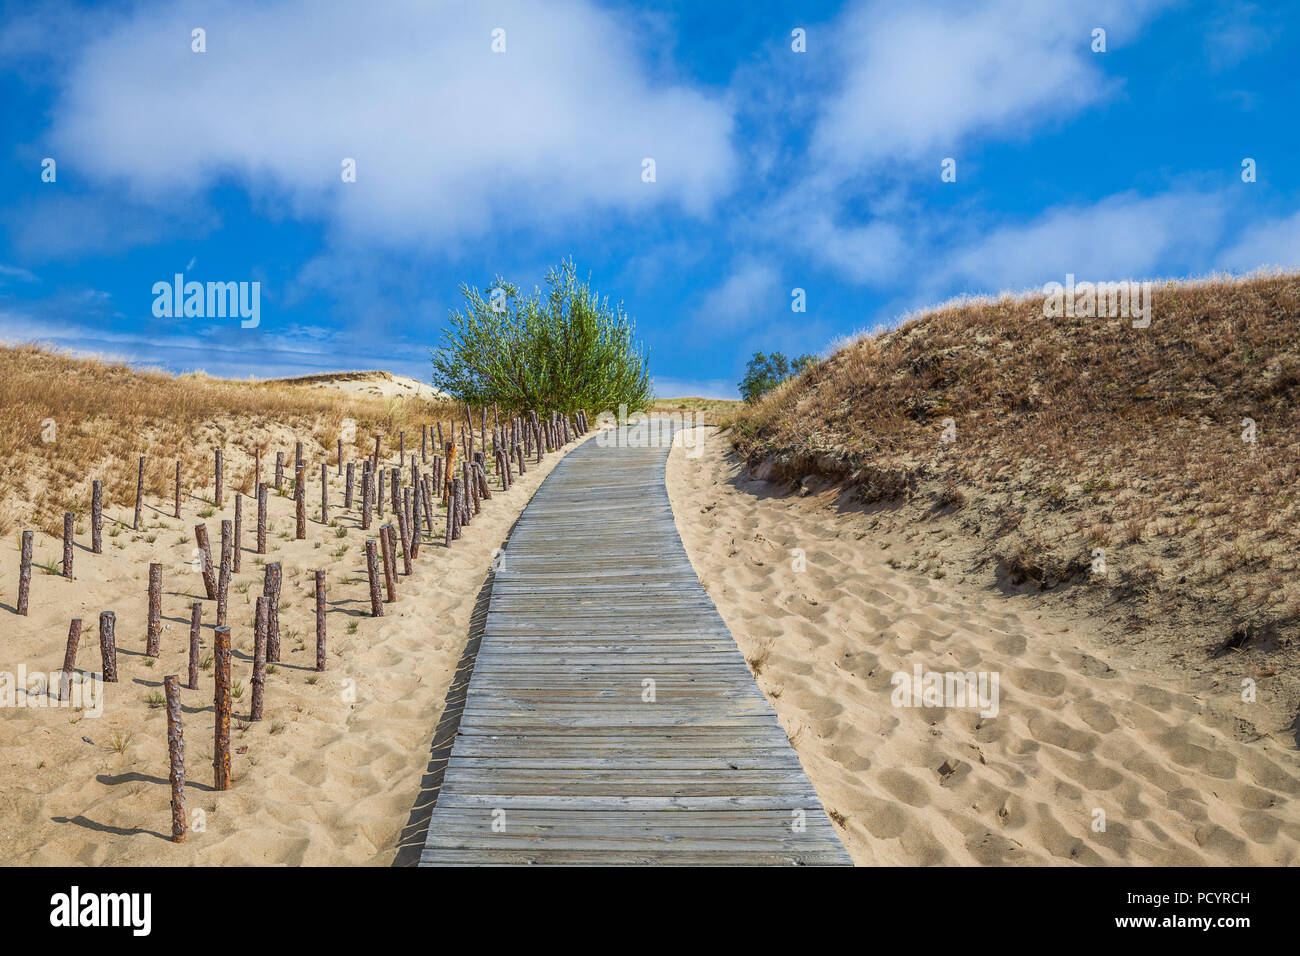 Dunes with wooden walkway over sand near Baltic sea. Board way over sand of beach dunes in Lithuania. Stock Photo